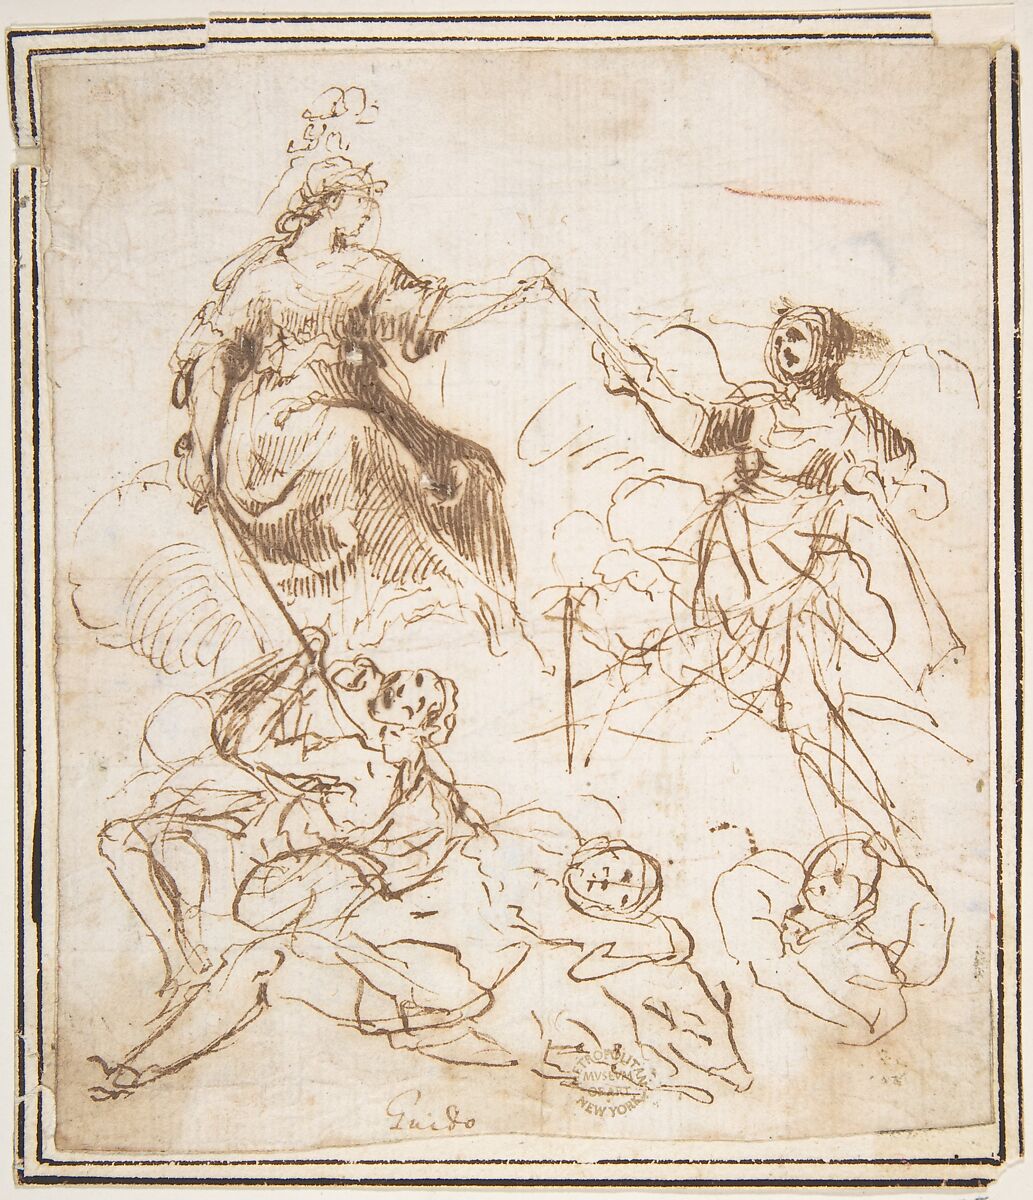 Group of Five Allegorical Figures, attributed to Francesco Allegrini (Italian, Cantiano (?) 1615/20–after 1679 Gubbio (?)), Pen and brown ink.  Framing lines in pen and brown ink 